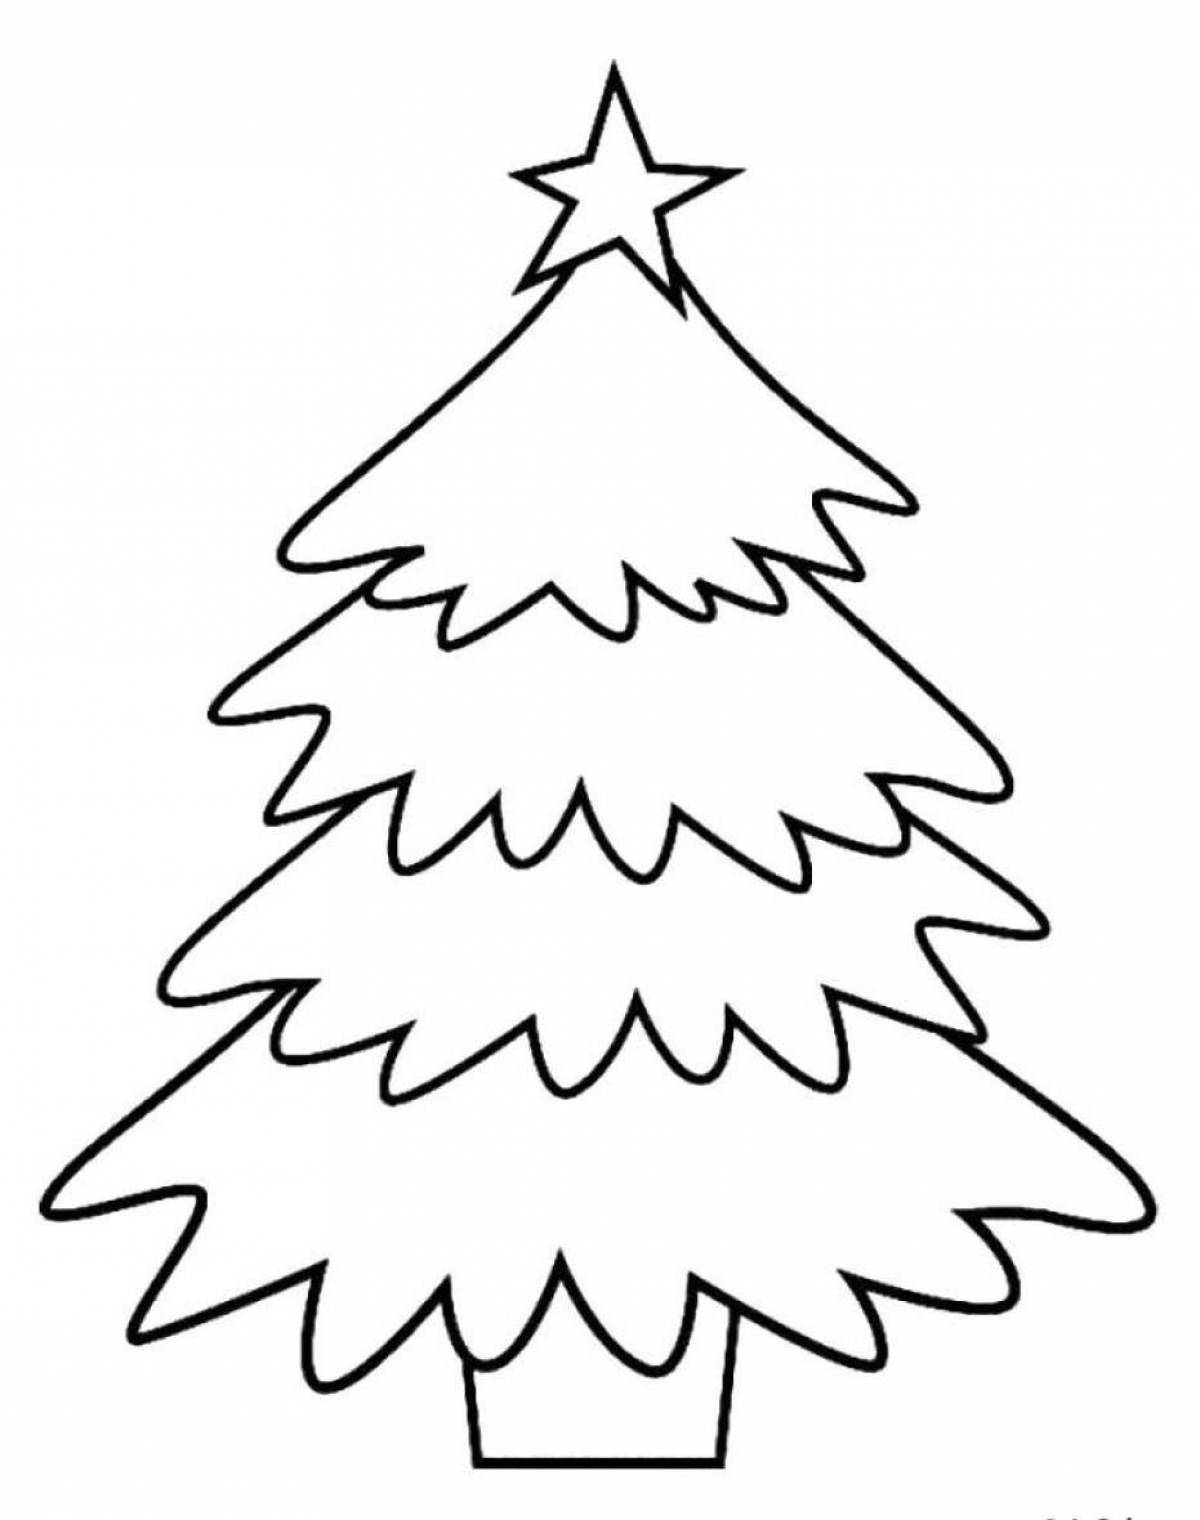 Luminous Christmas tree coloring book for 4-5 year olds